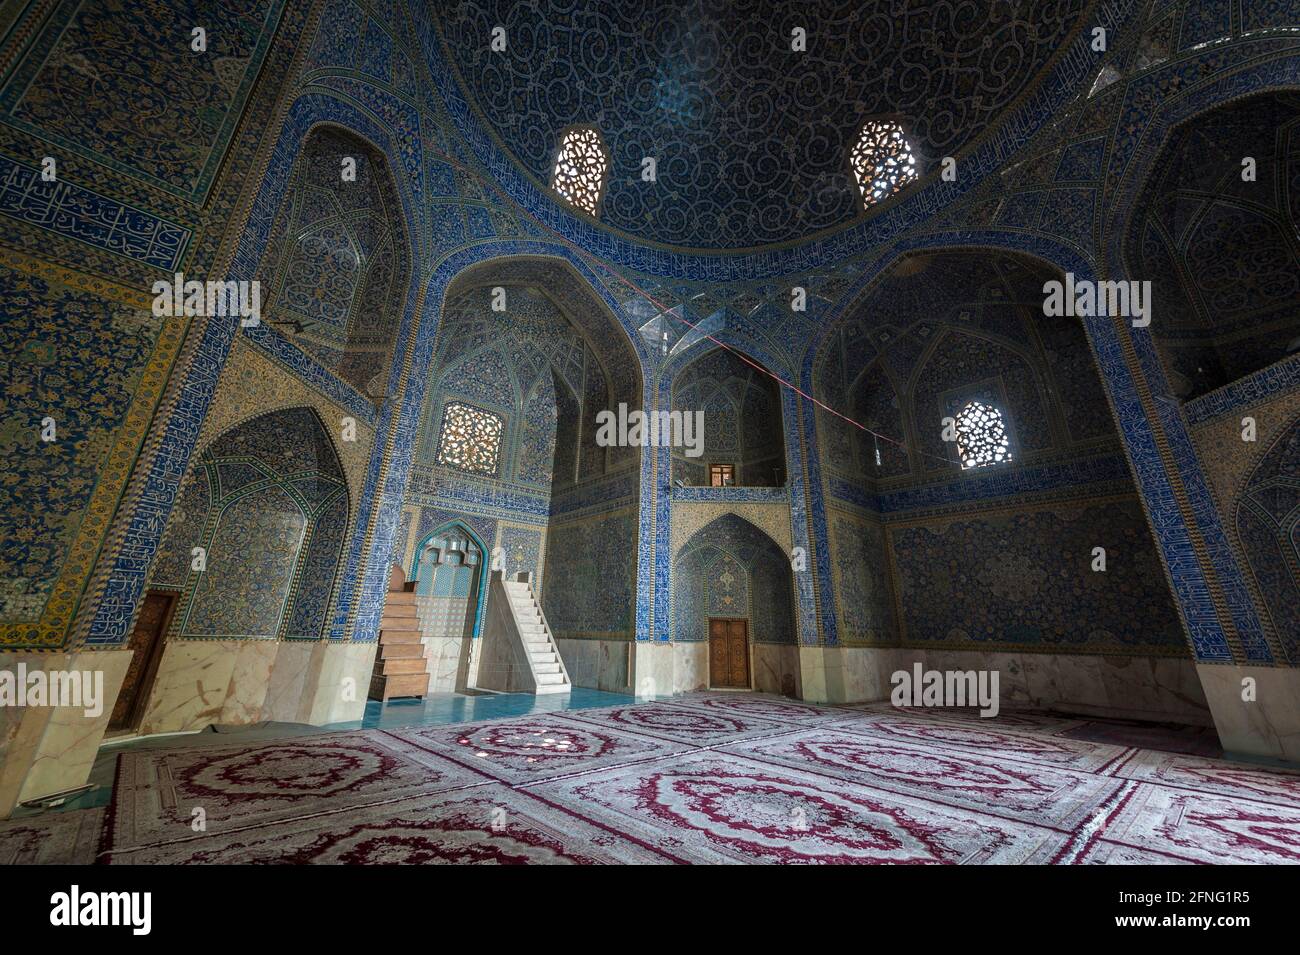 The prayer hall of the Chahar Bagh Theological School in Isfahan, Iran. Stock Photo